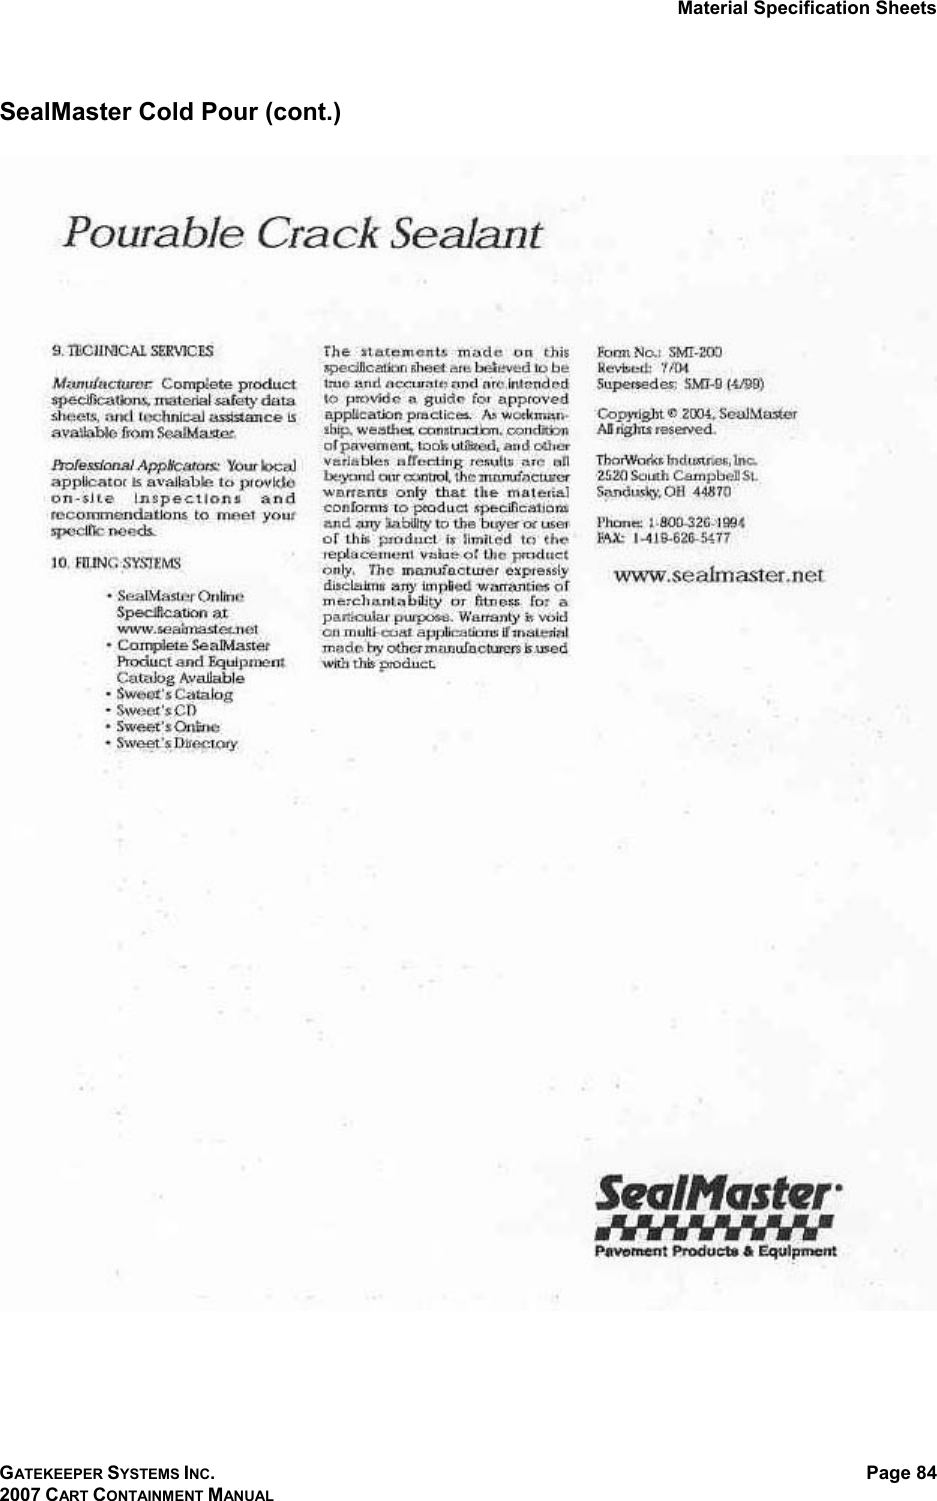 Material Specification Sheets GATEKEEPER SYSTEMS INC. 2007 CART CONTAINMENT MANUAL Page 84  SealMaster Cold Pour (cont.)    